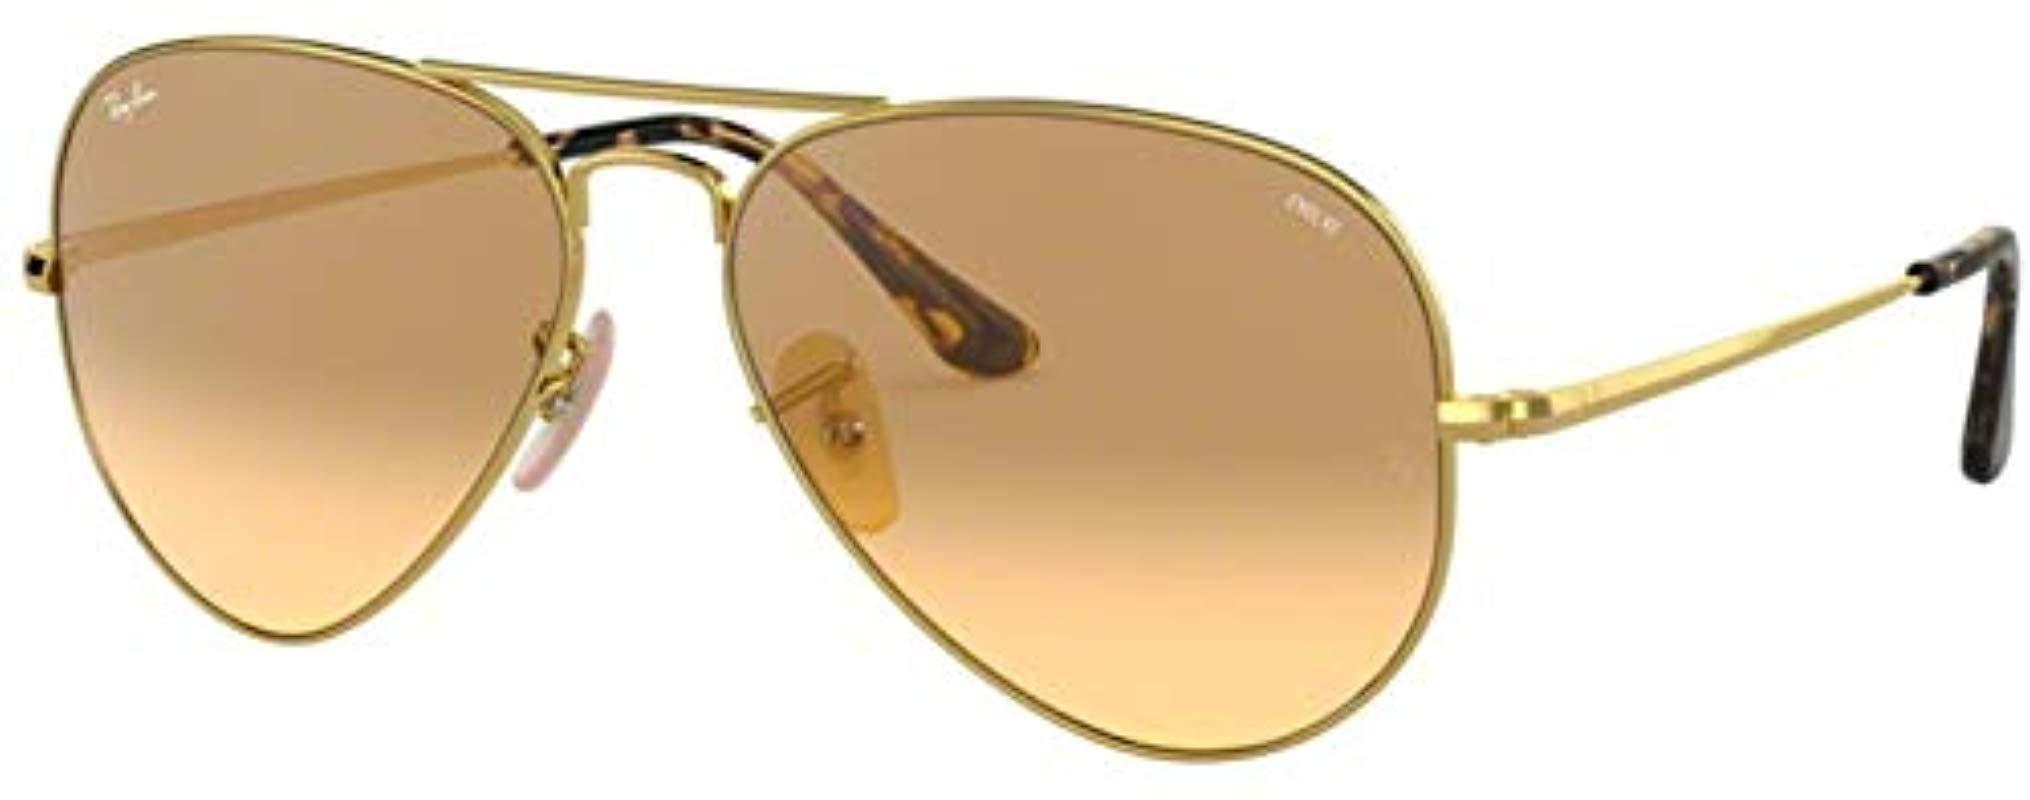 Ray-Ban 0rb3689 Polarized Aviator Sunglasses, Brushed Gold, 55.0 Mm in ...